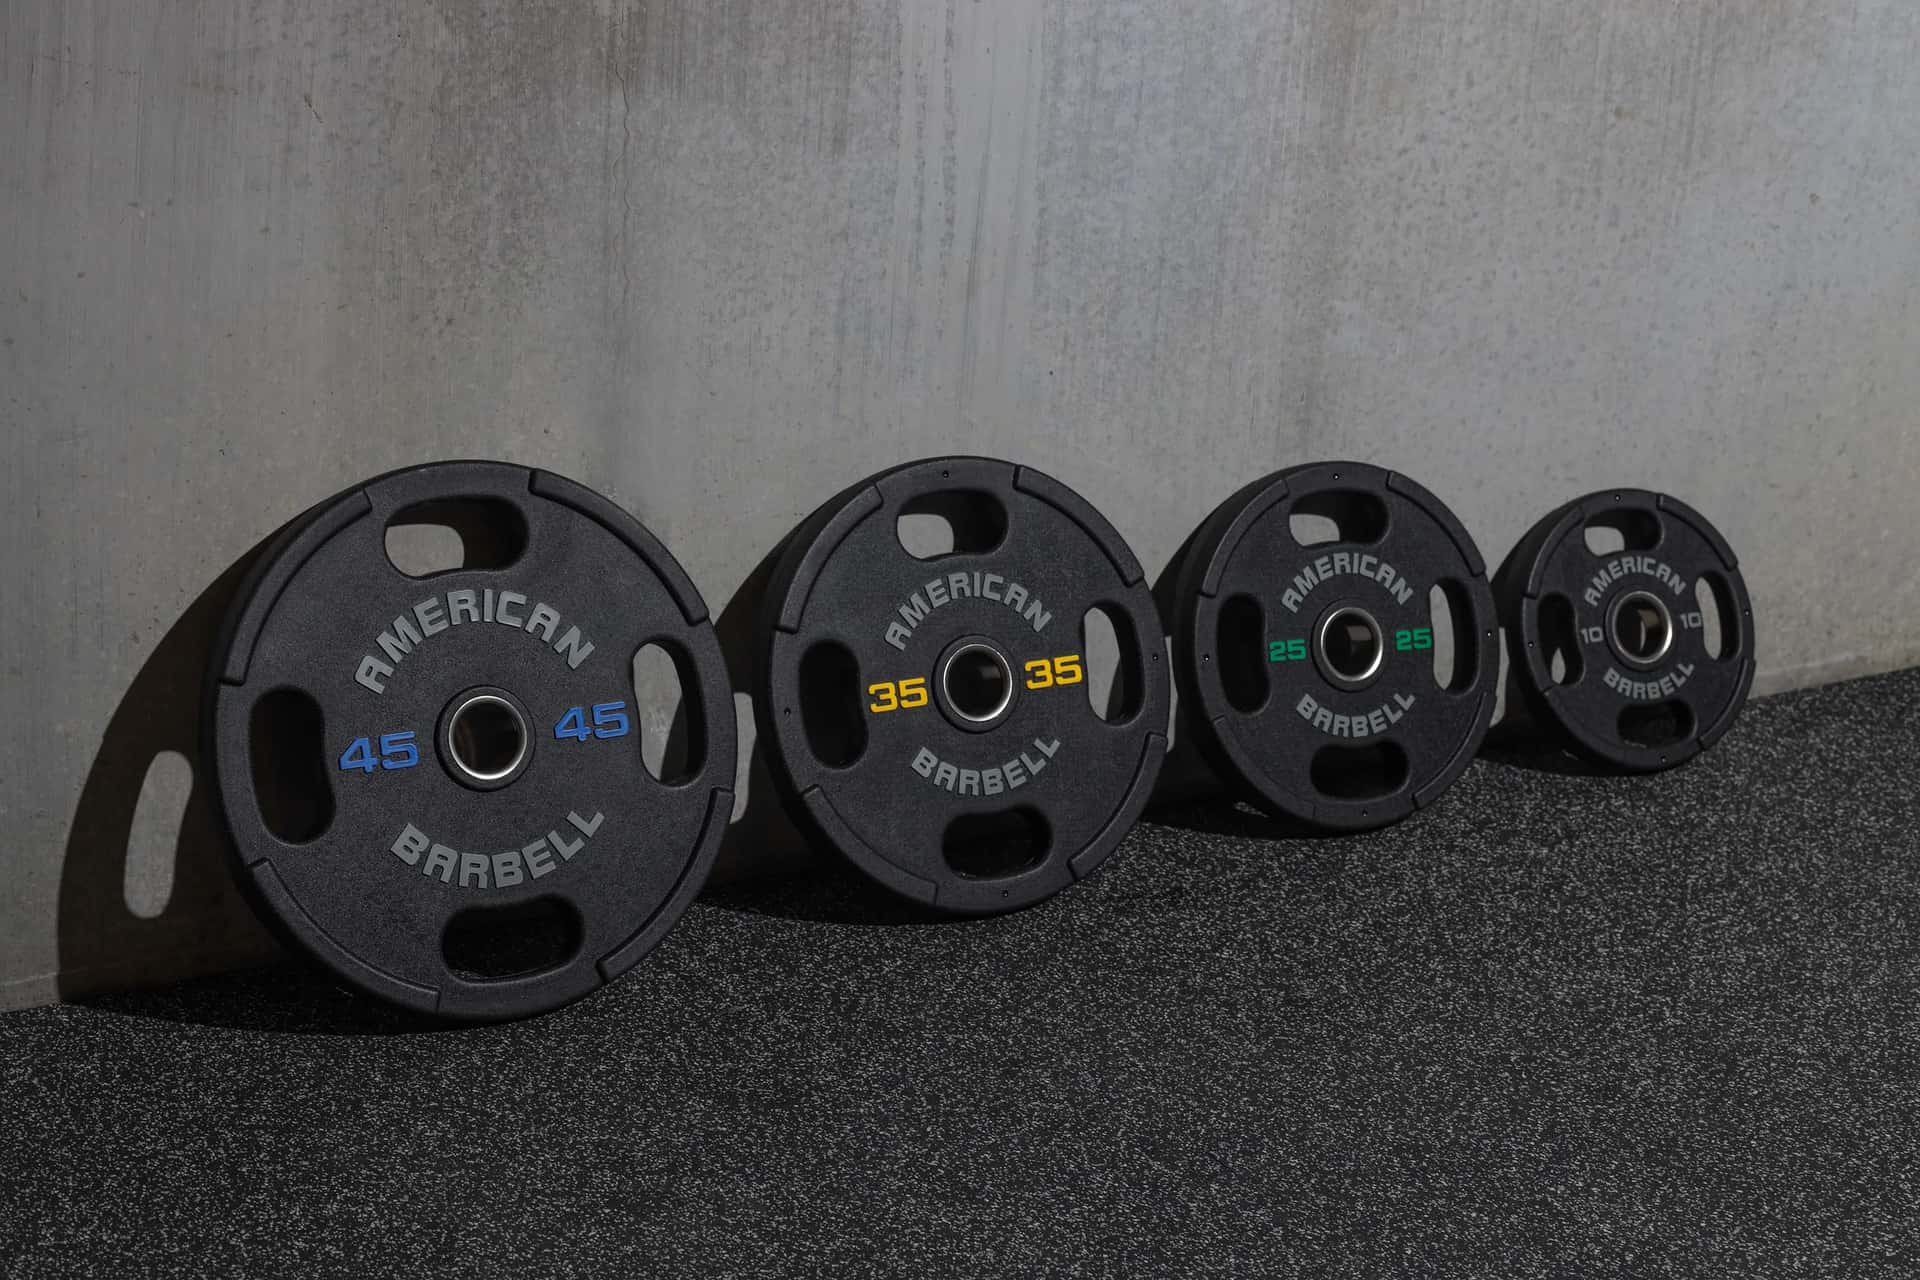 American Barbell Urethane Olympic Plates main